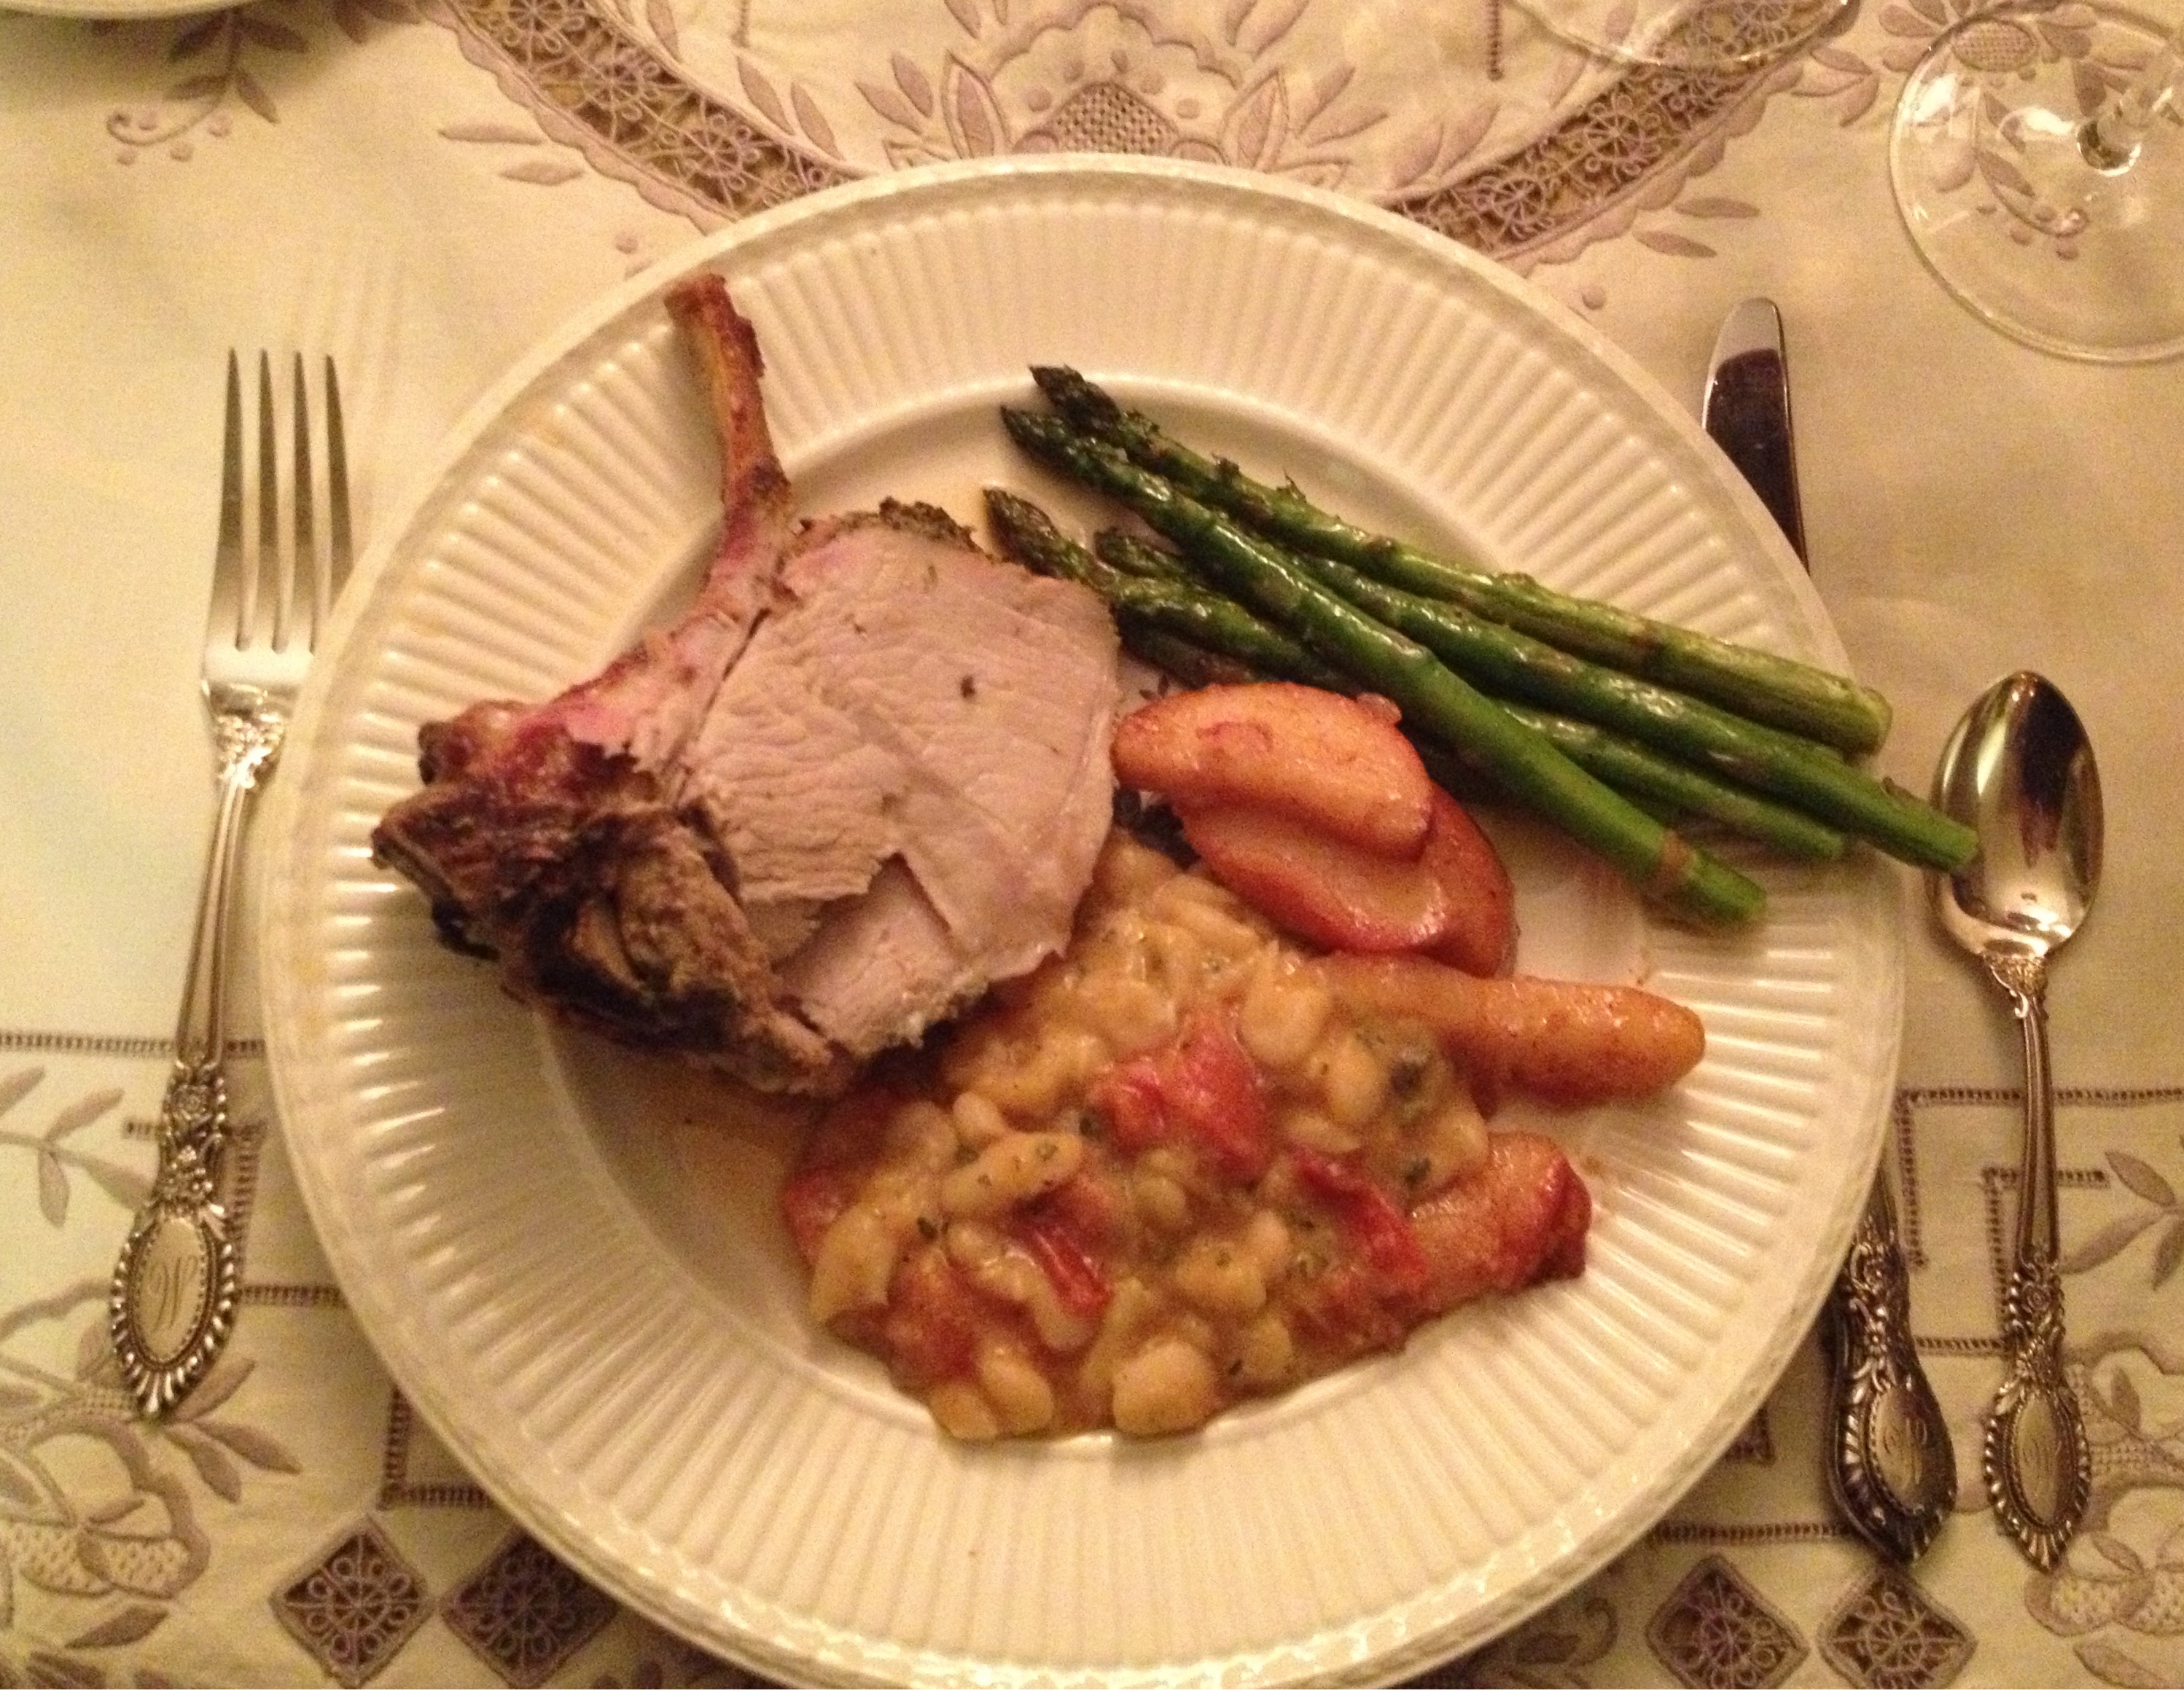 Crown roast of pork with sauteed apples, Italian beans, and roasted asparagus on an antique Wedgewood plate on a beautiful tablecloth